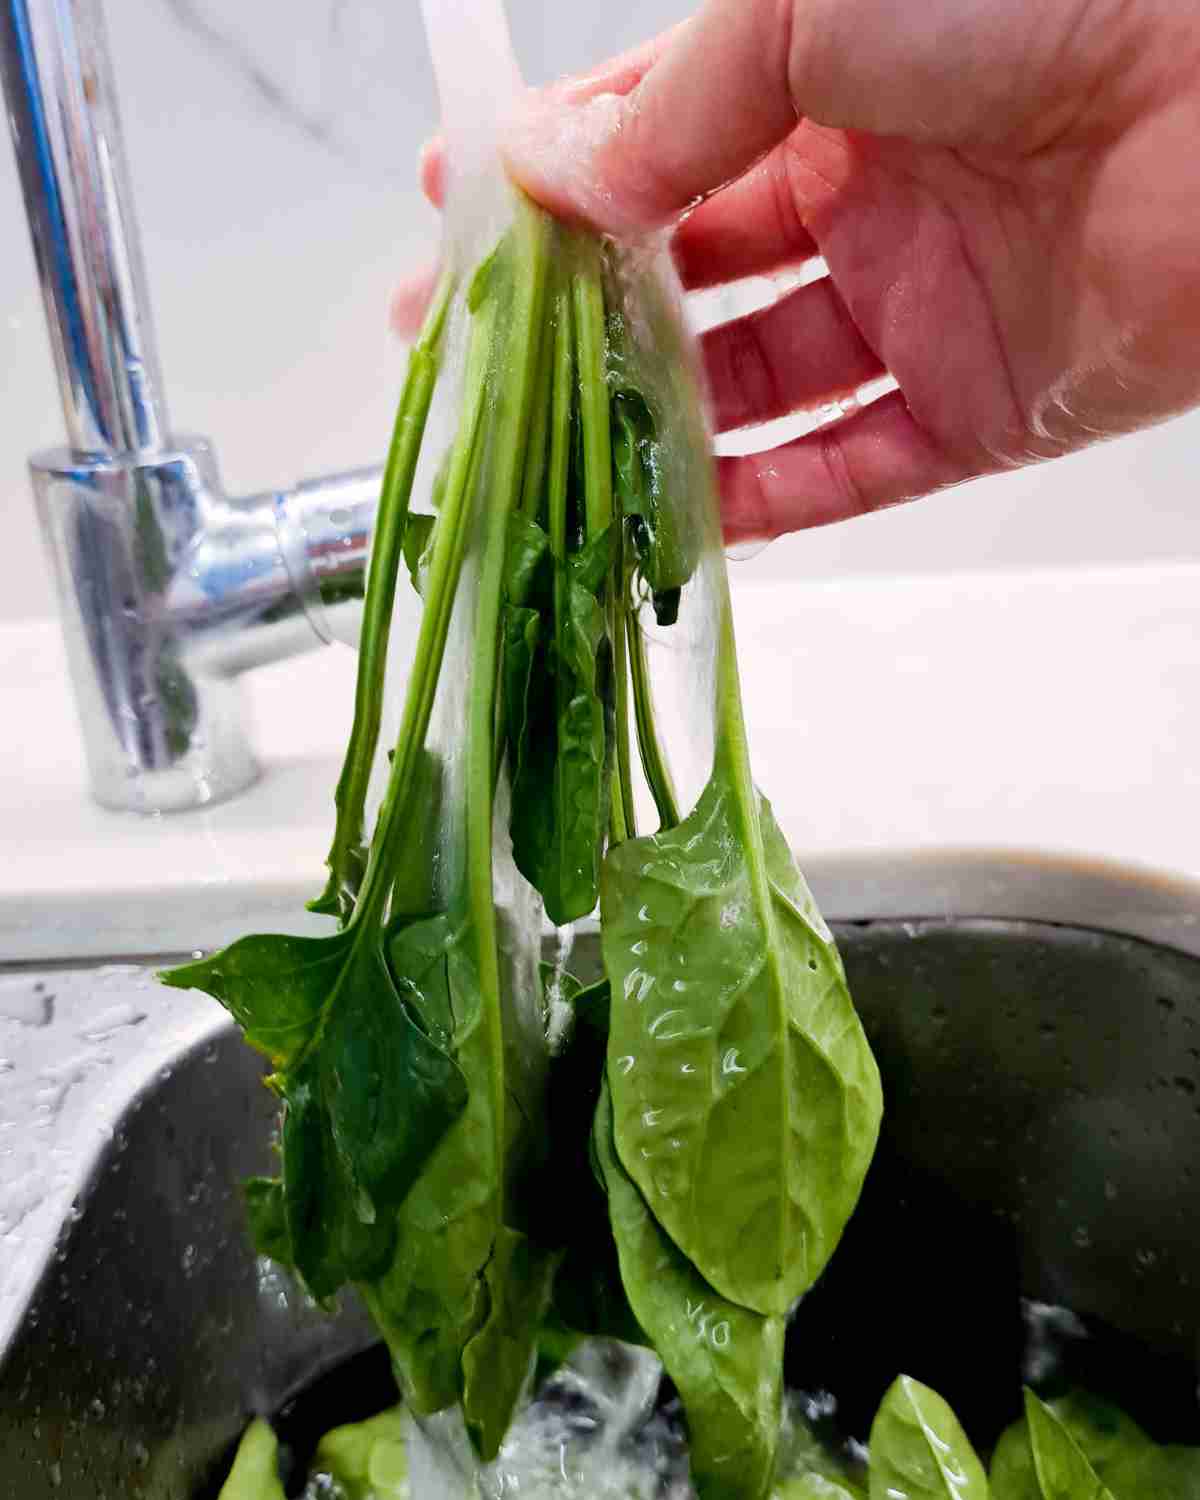 A plant of english spinach being washed under a running tap